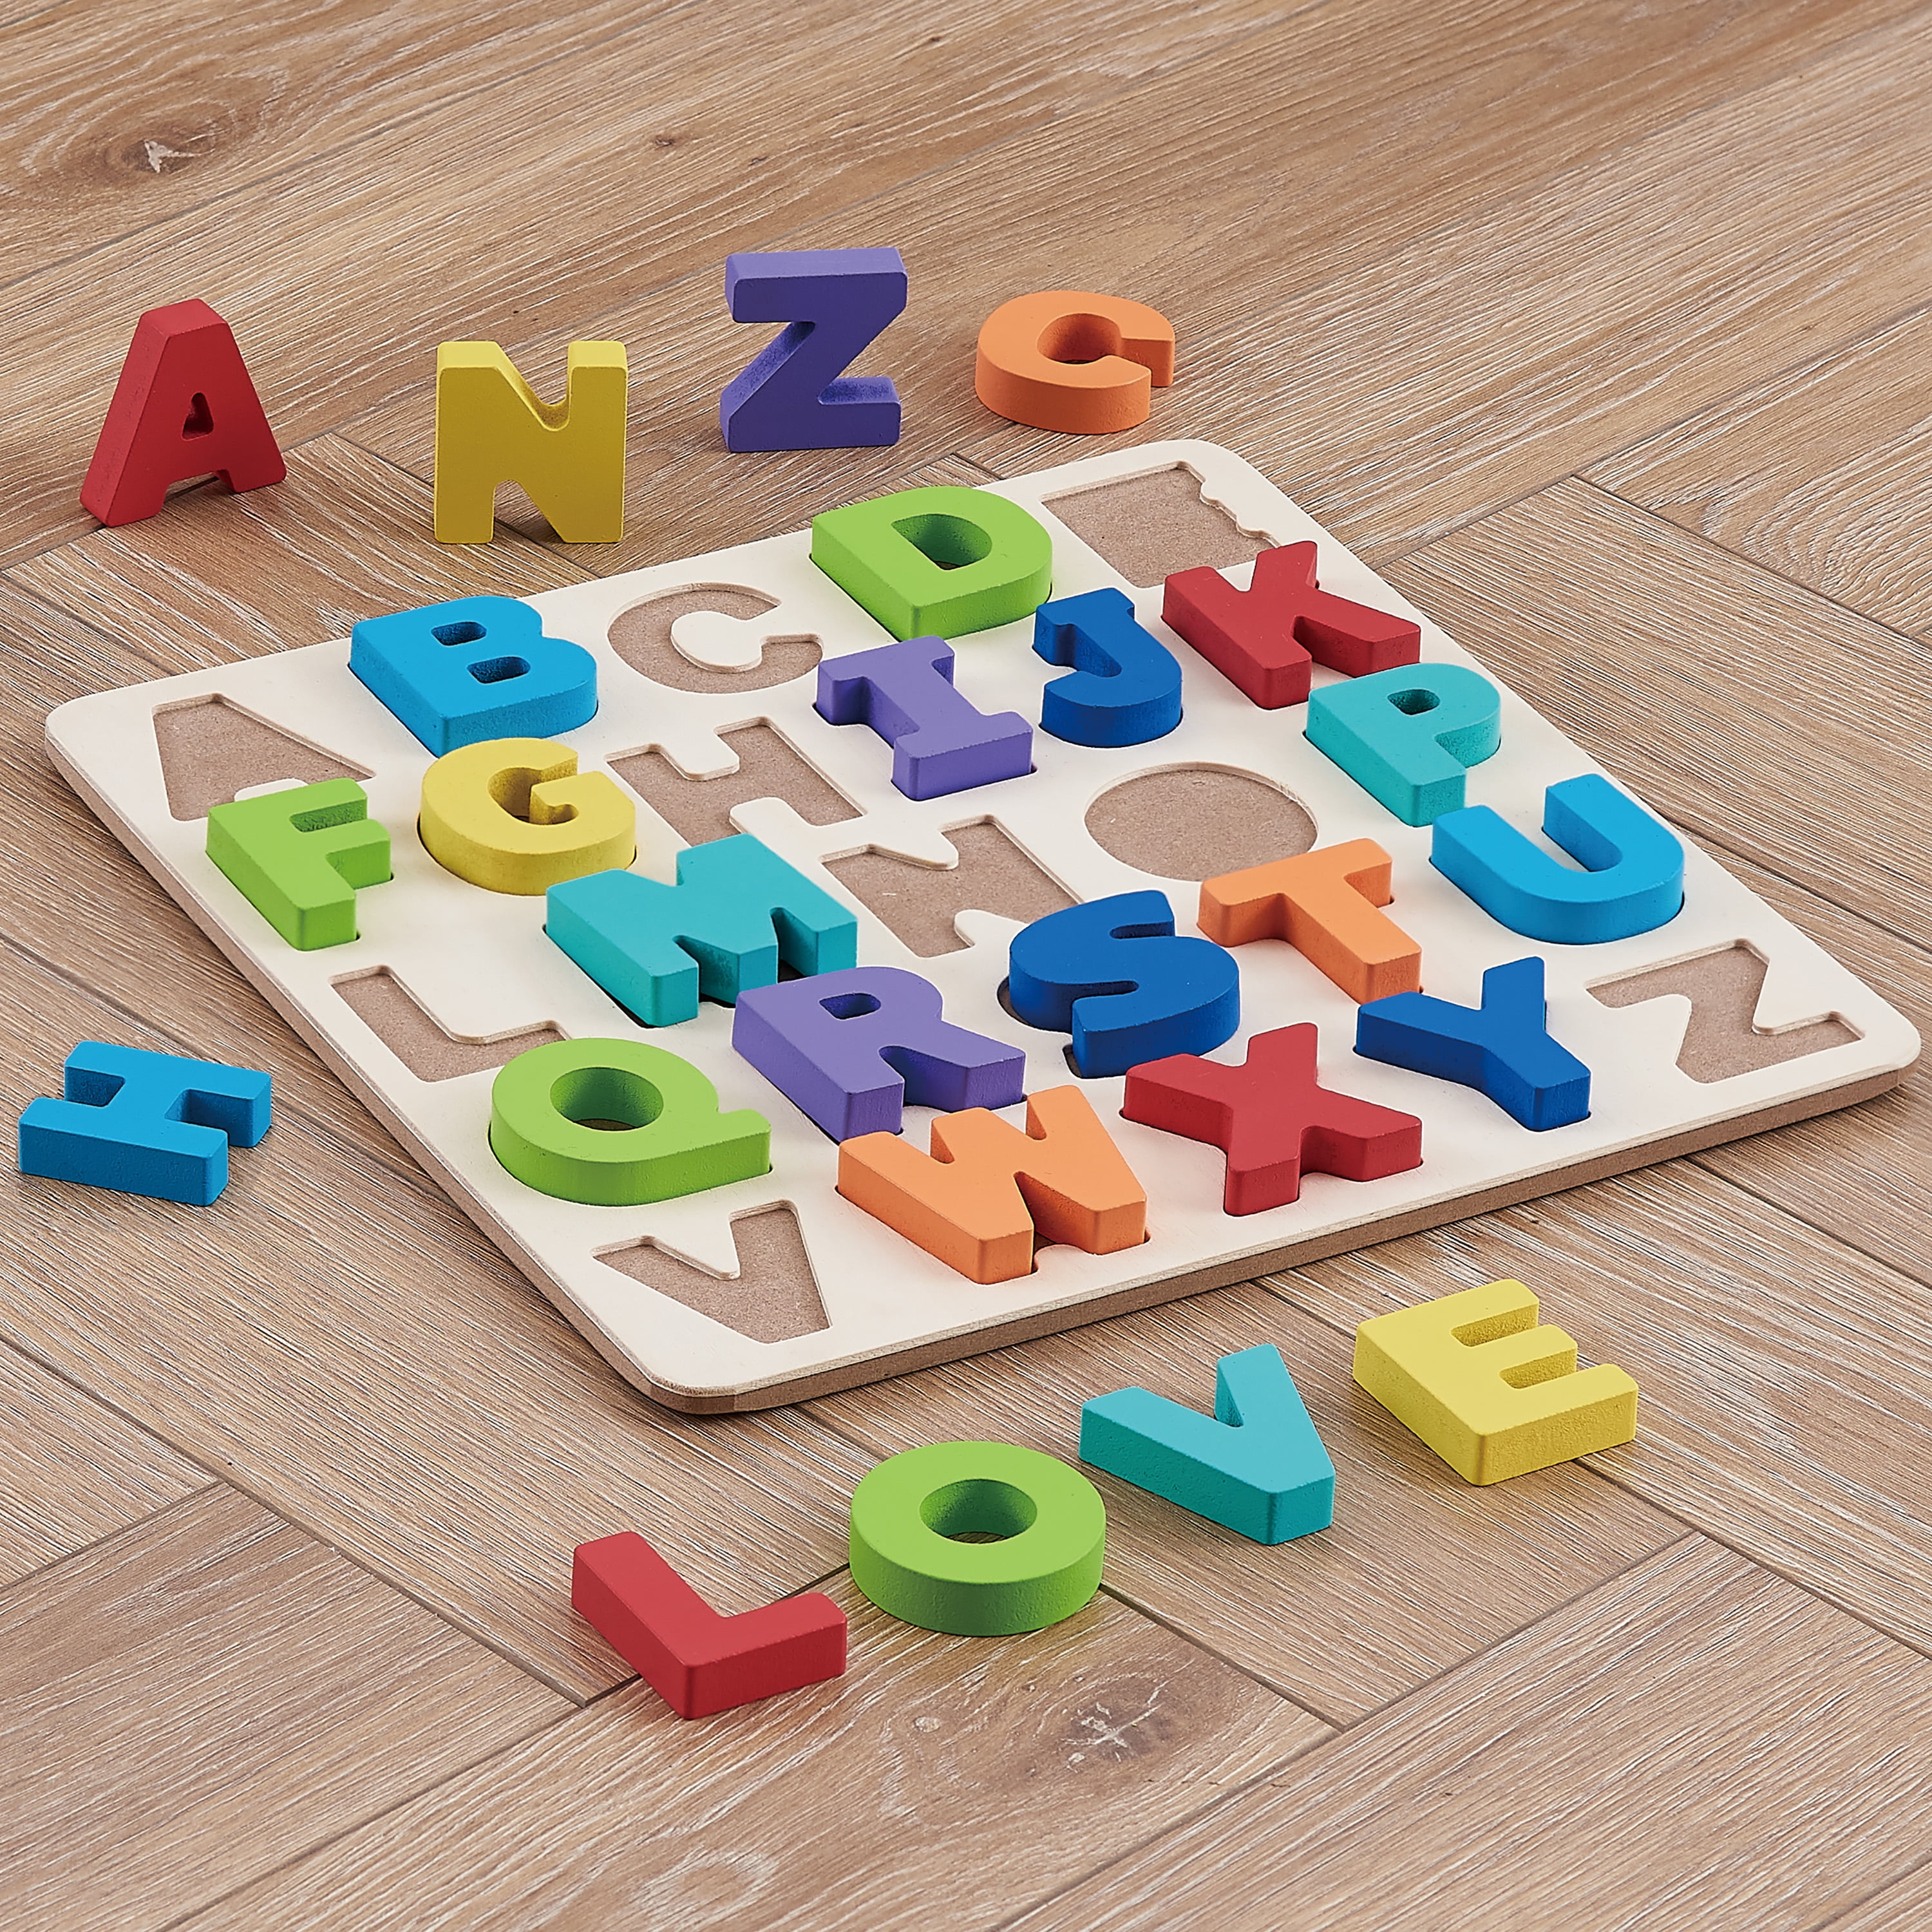 Spark Create Imagine Create Imagine Spark Create Imagine Wooden Alphabet Puzzle Jigsaw Puzzle with 27 Pieces that provides young child with a great way of learning the alphabet in an easy and fun way